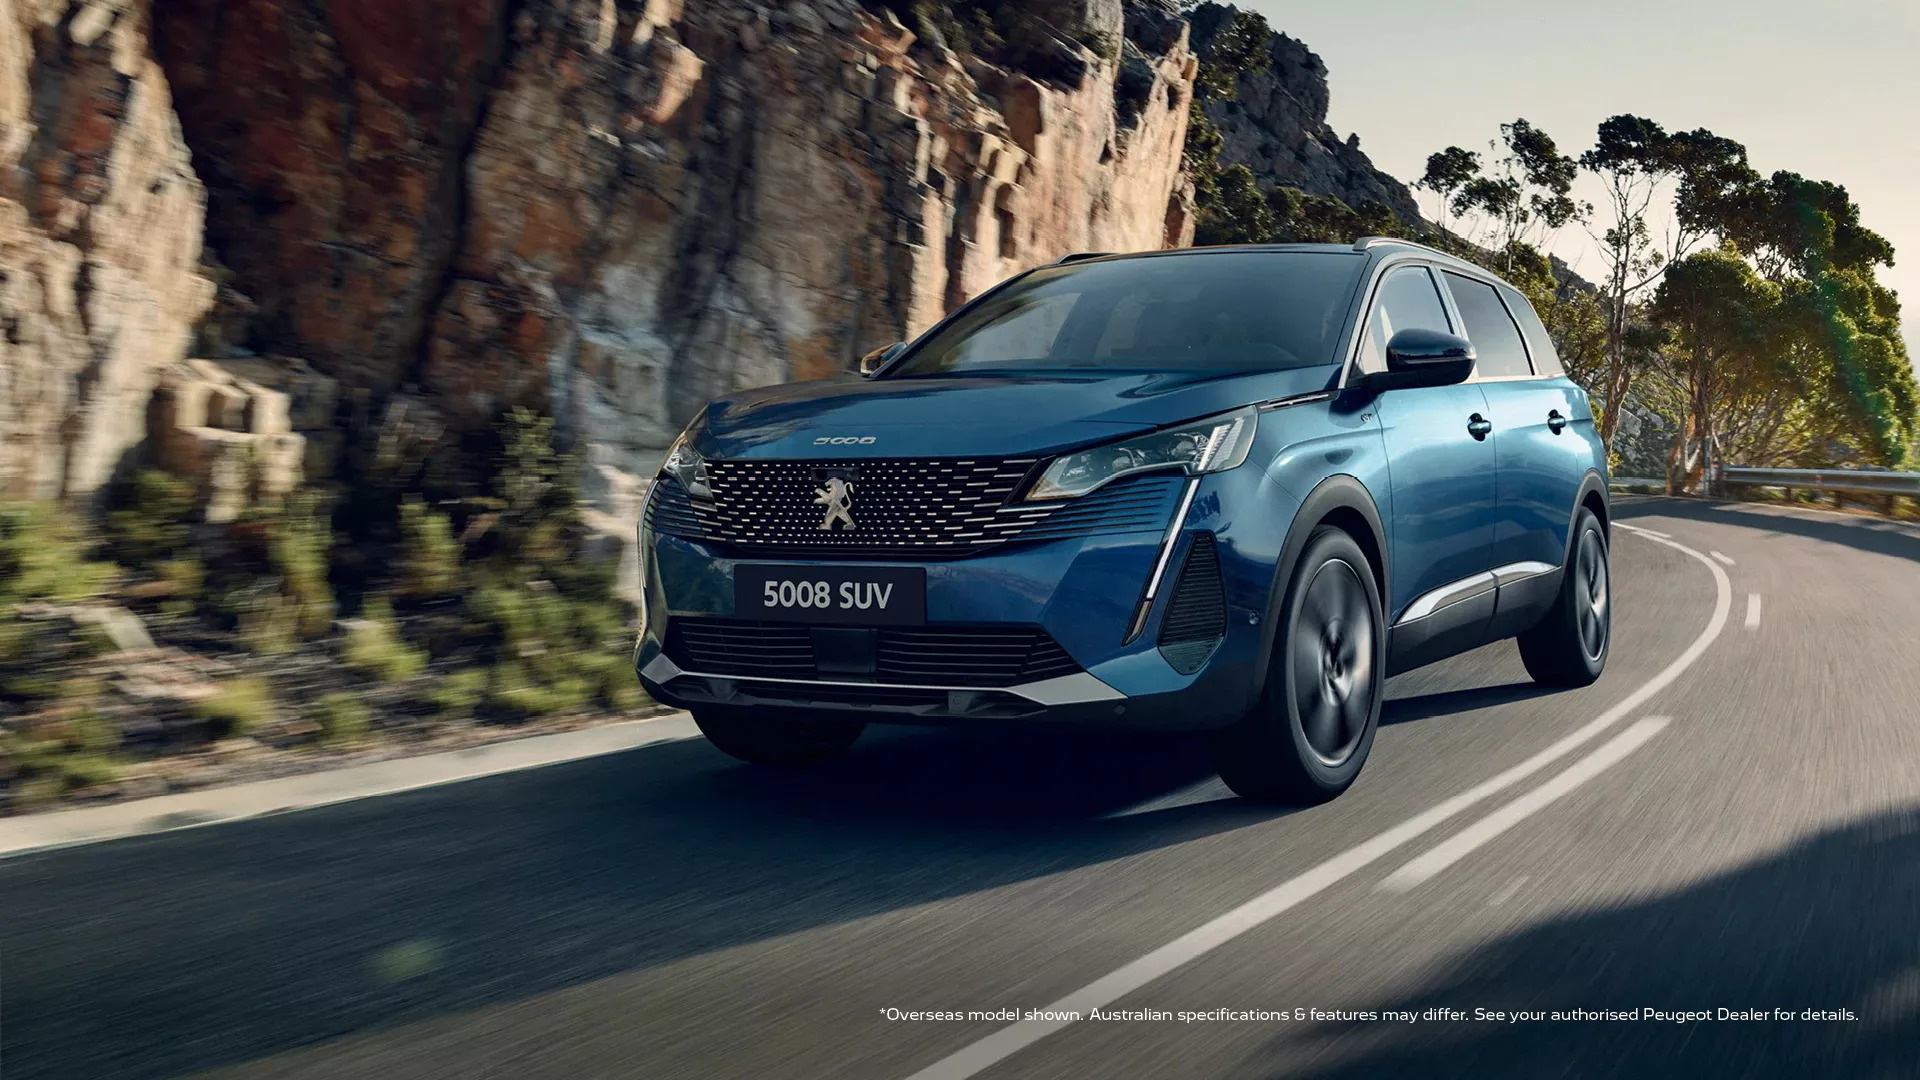 The new Peugeot 5008 will launch globally in August next year and is promised to return to Vietnam in 2025 - Photo: Peugeot